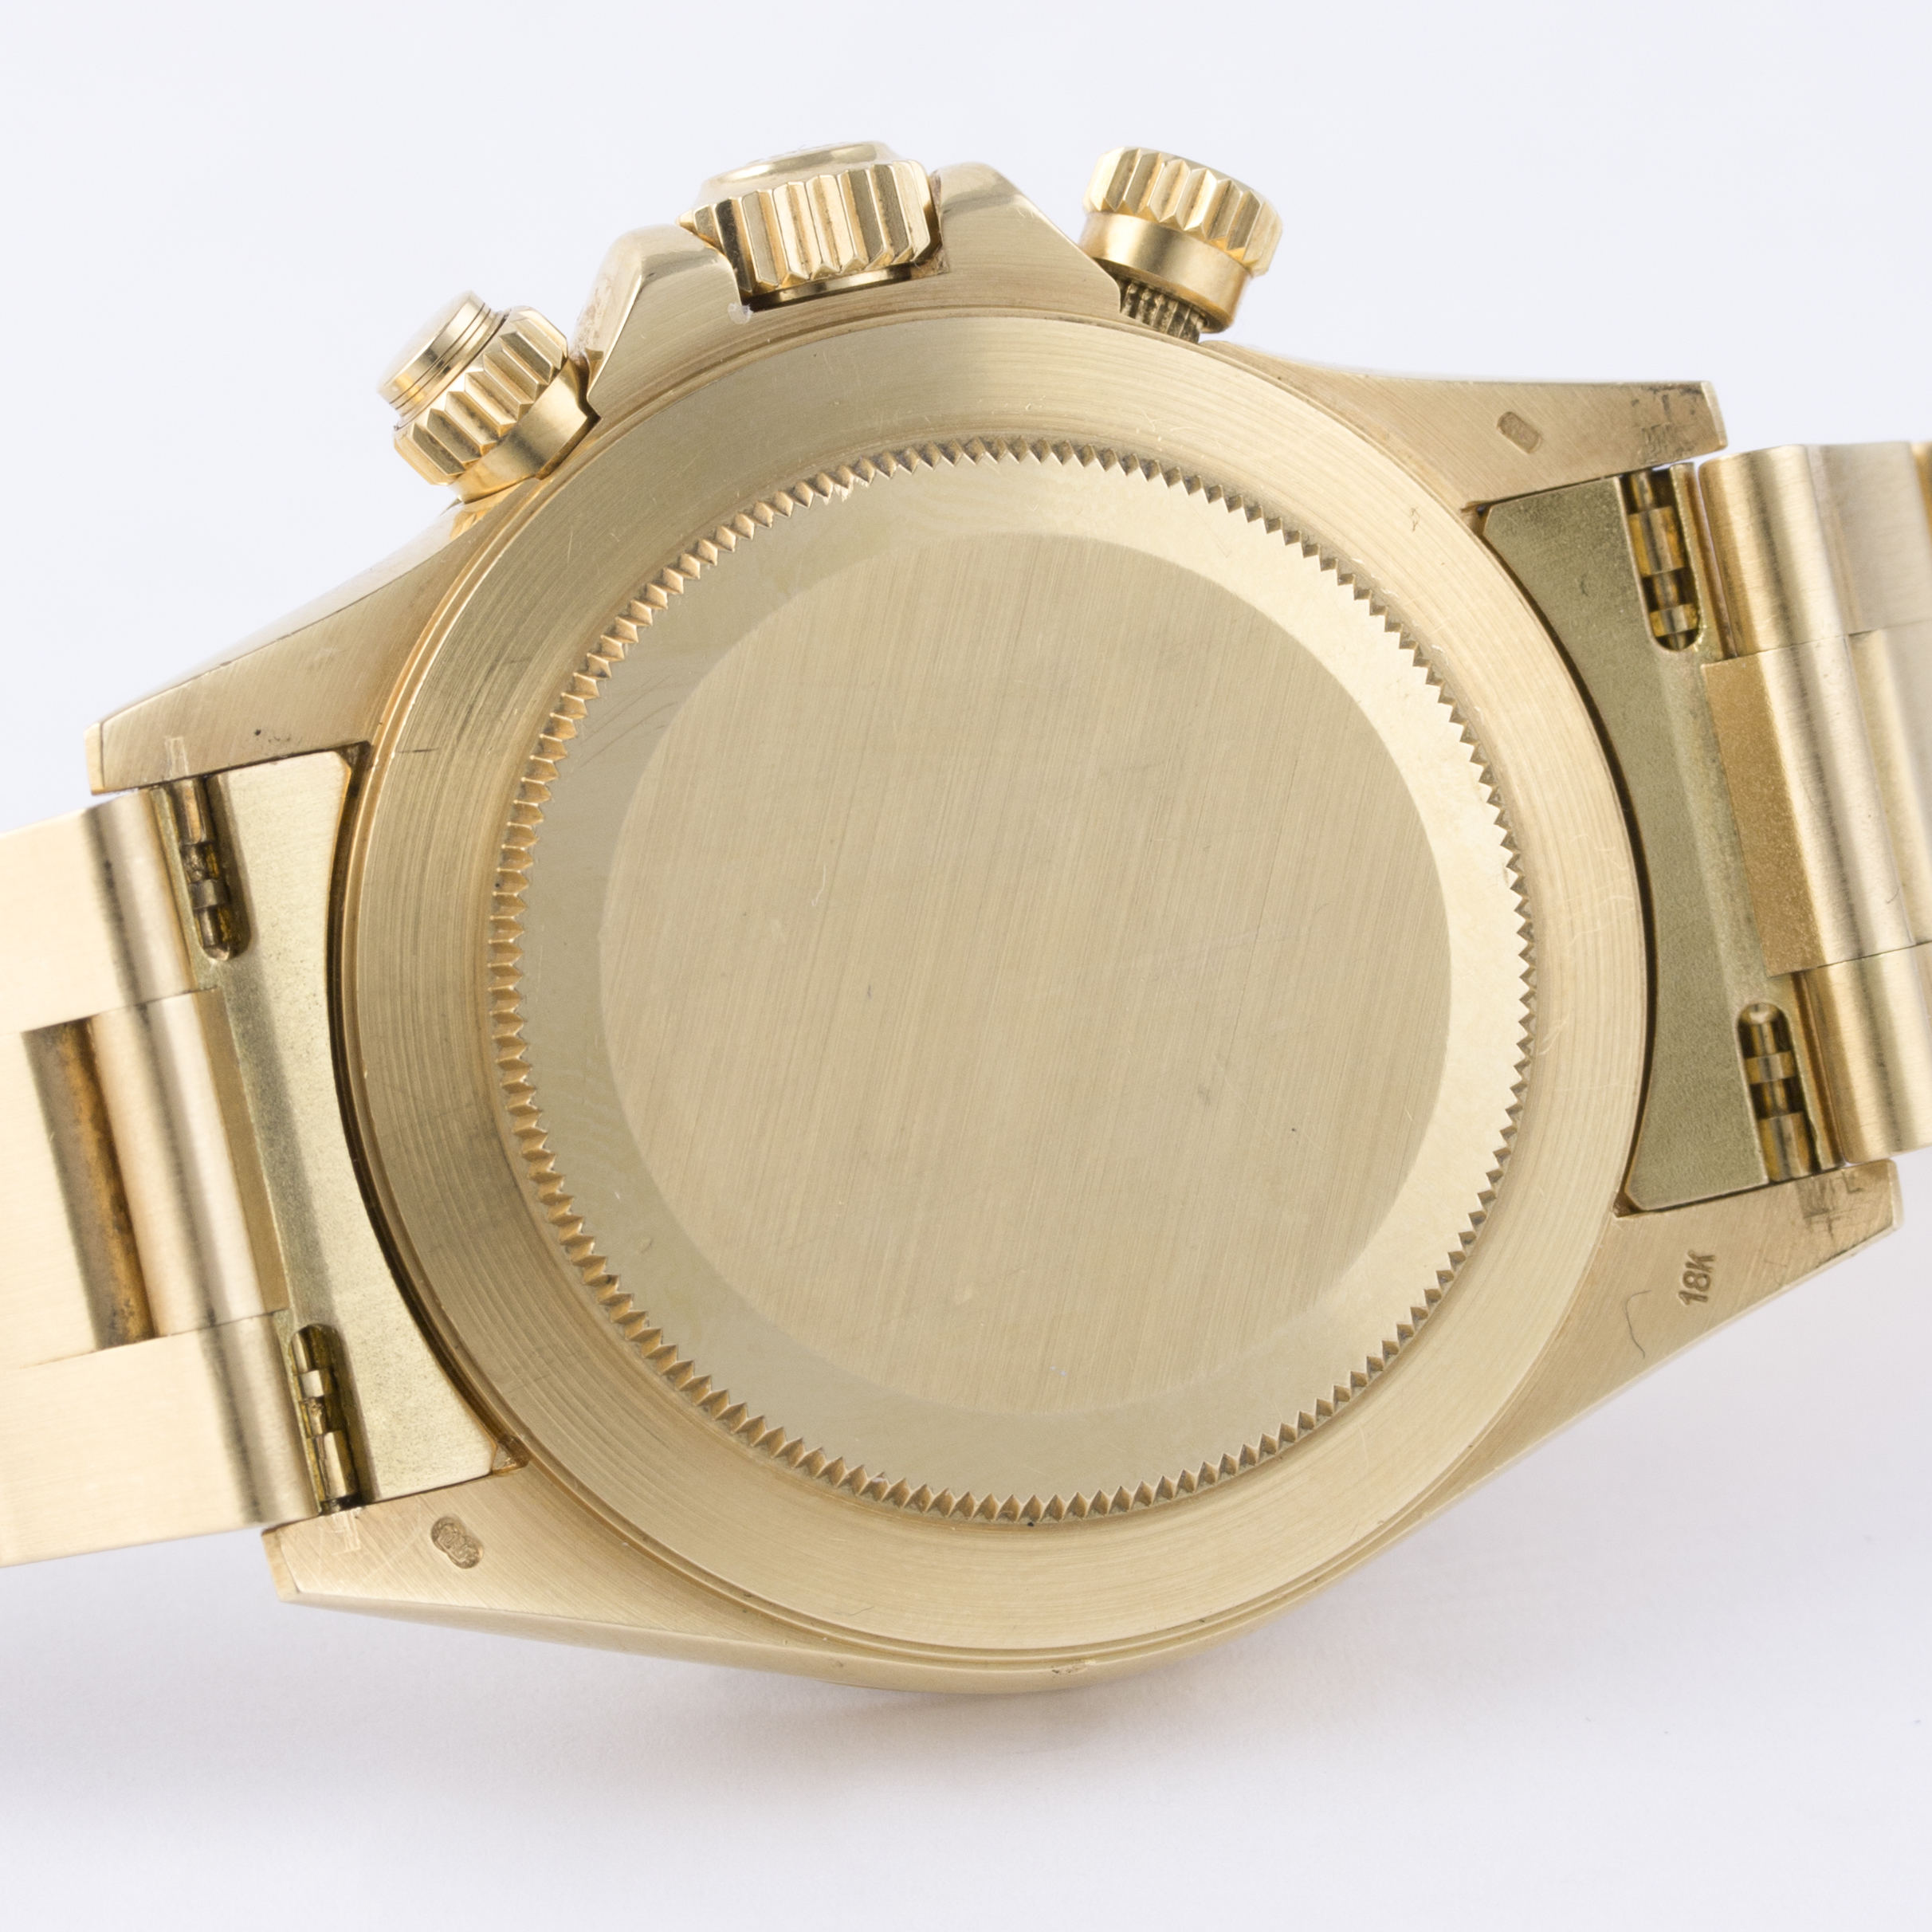 A FINE & RARE GENTLEMAN'S 18K SOLID GOLD ROLEX OYSTER PERPETUAL "FLOATING DIAL" COSMOGRAPH DAYTONA - Image 6 of 6